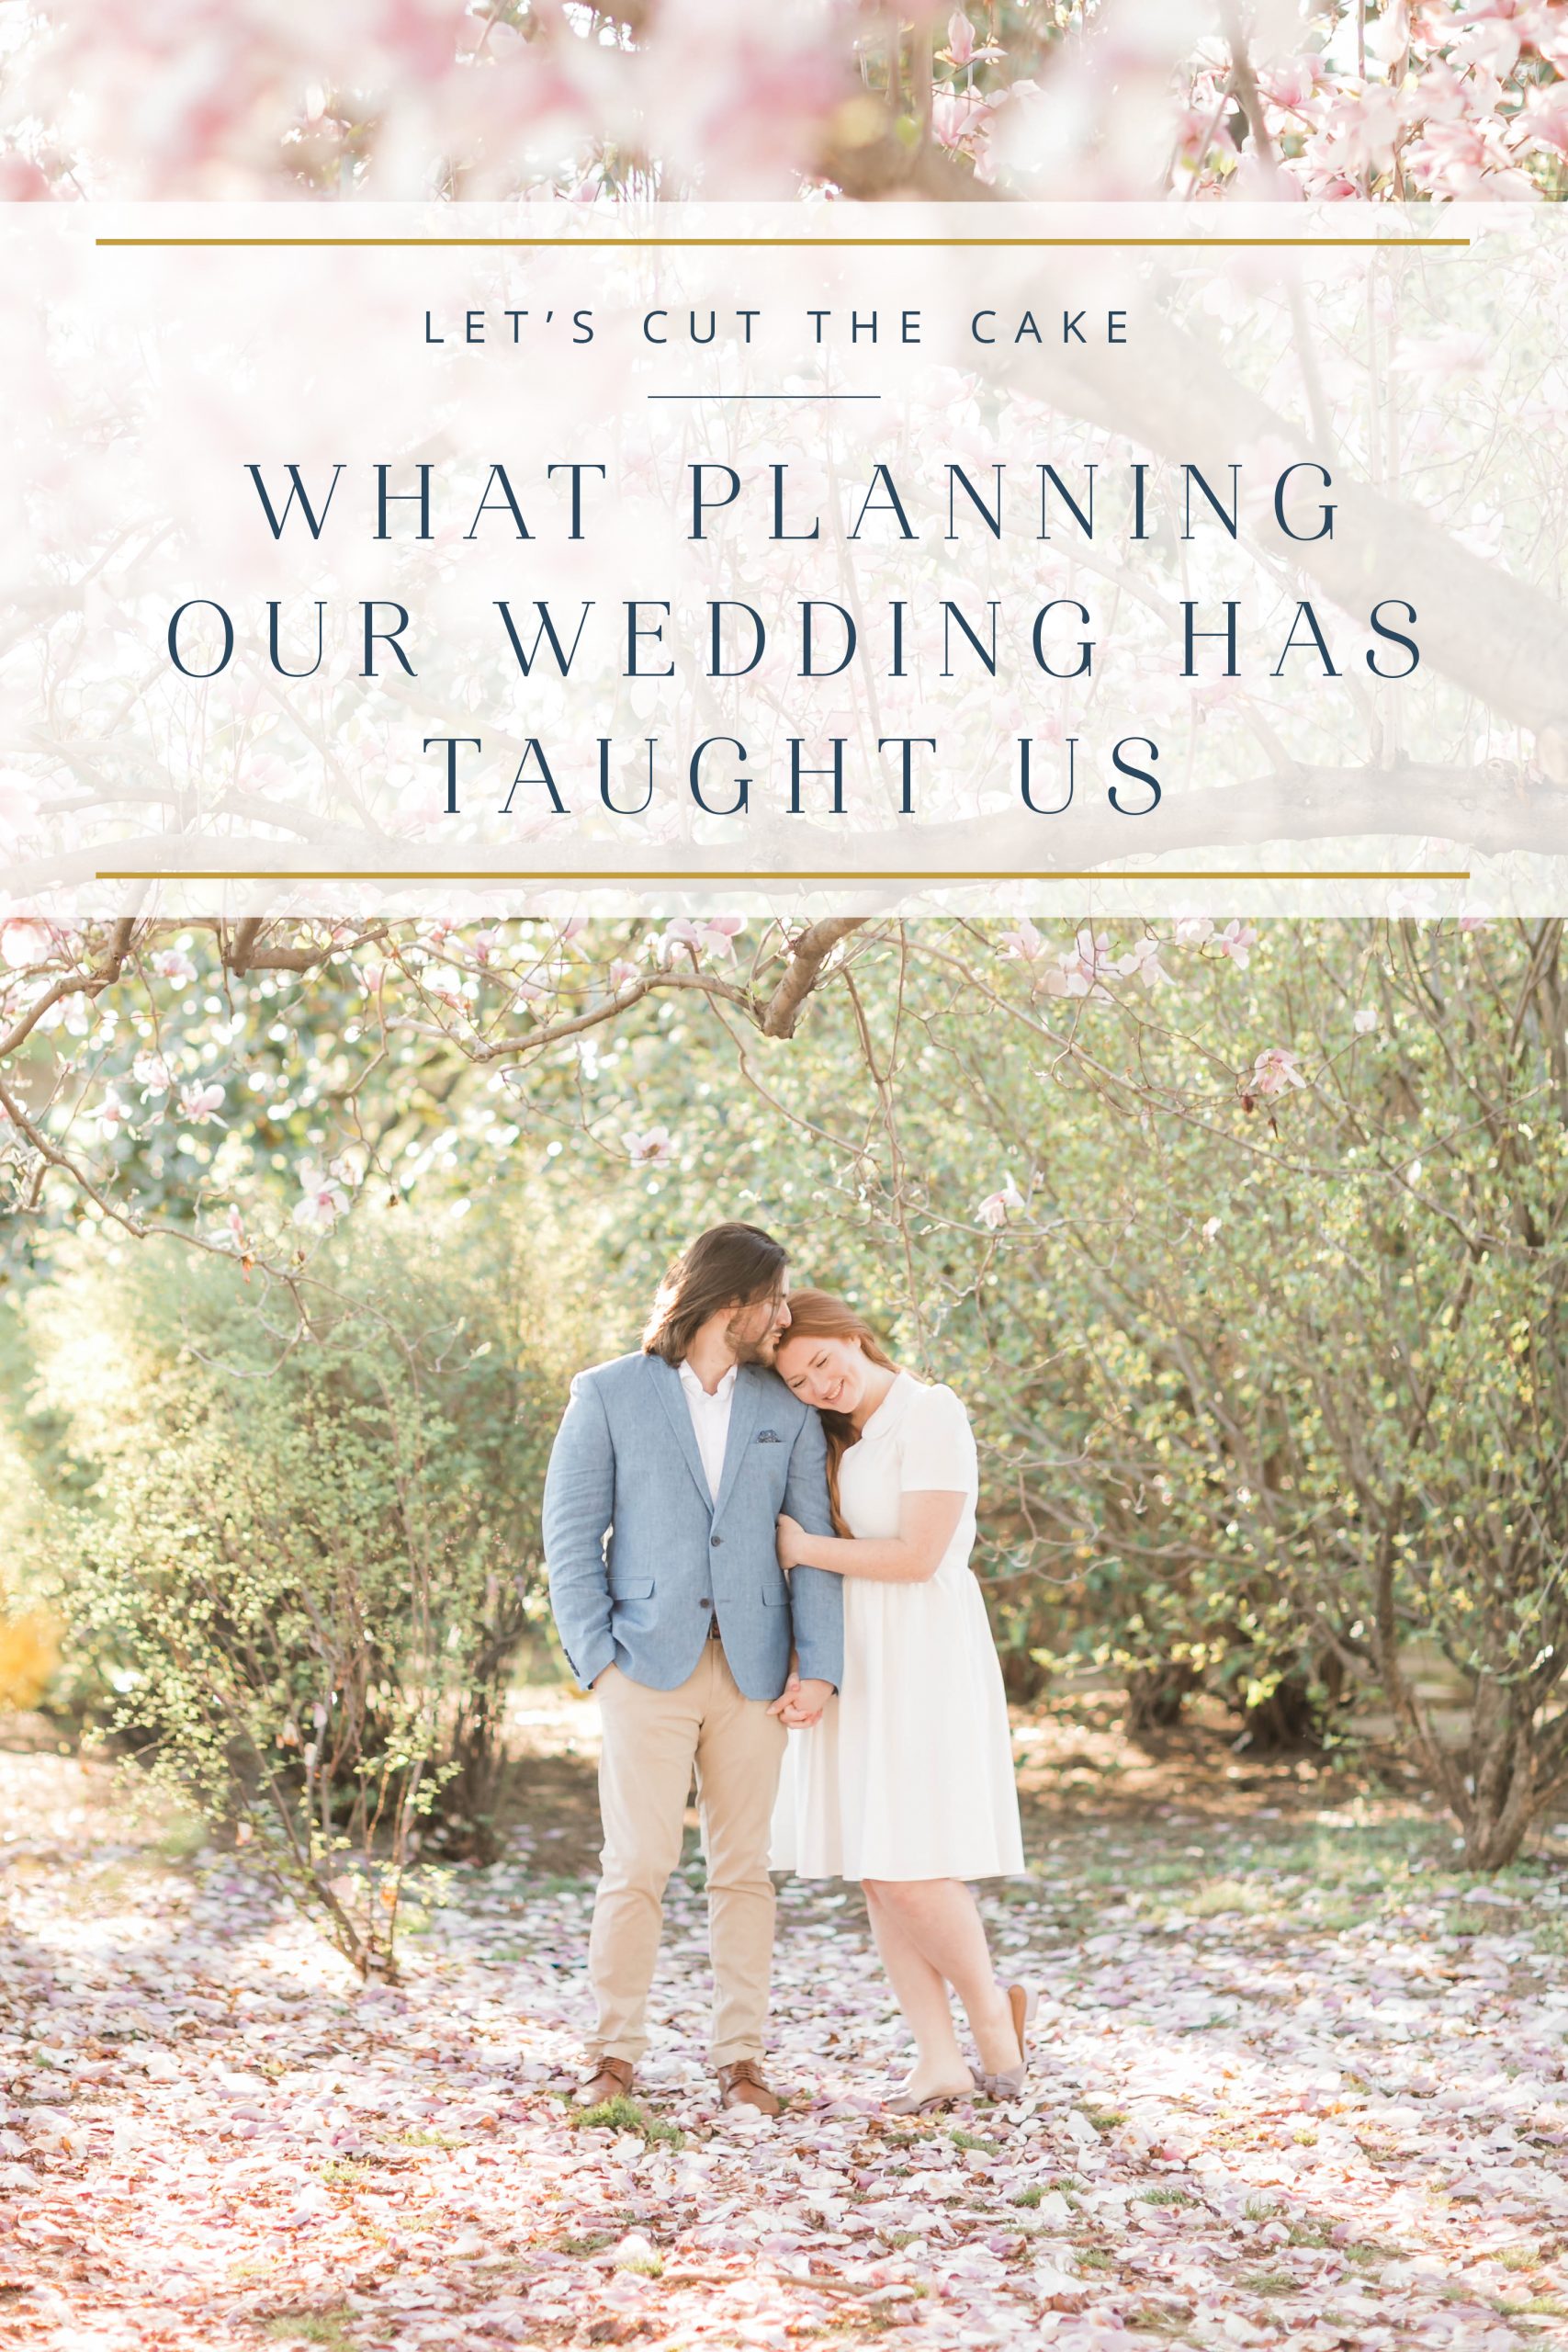 Planning our wedding as a pair of wedding photographers: Here's what we've learned in the last year or so of planning!